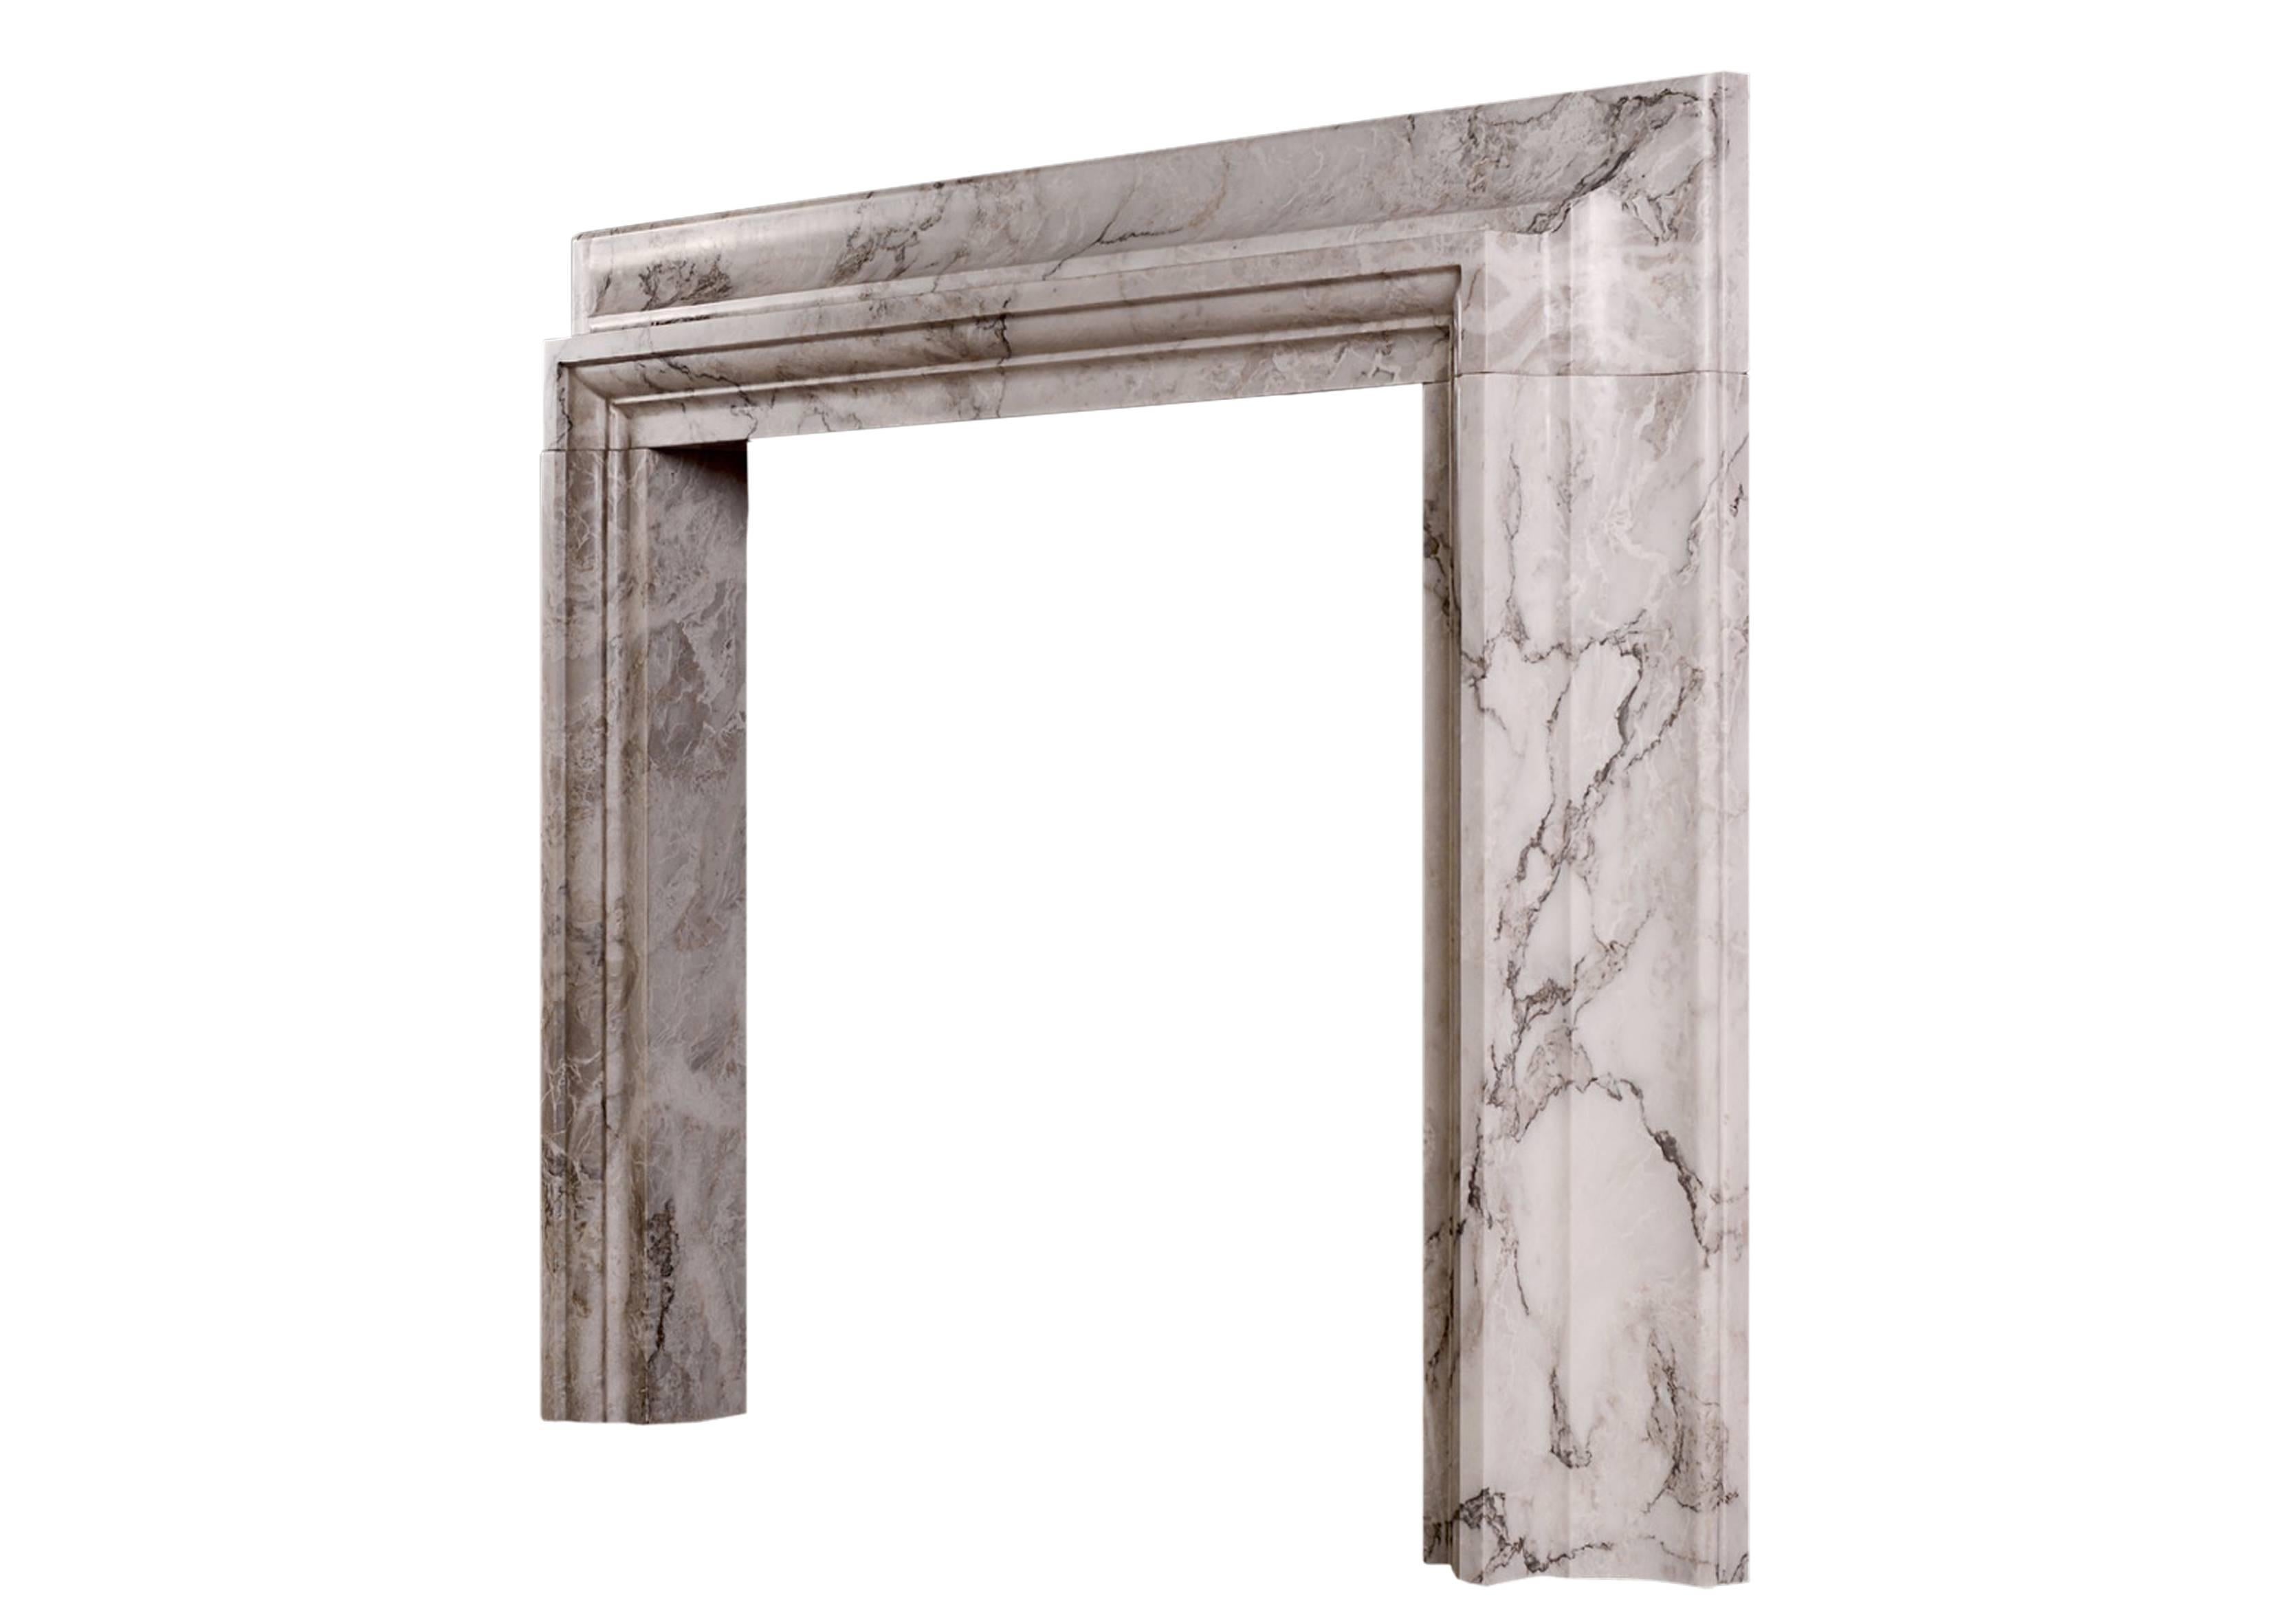 Baroque Stylish Italian Fireplace in Arabescato Marble For Sale